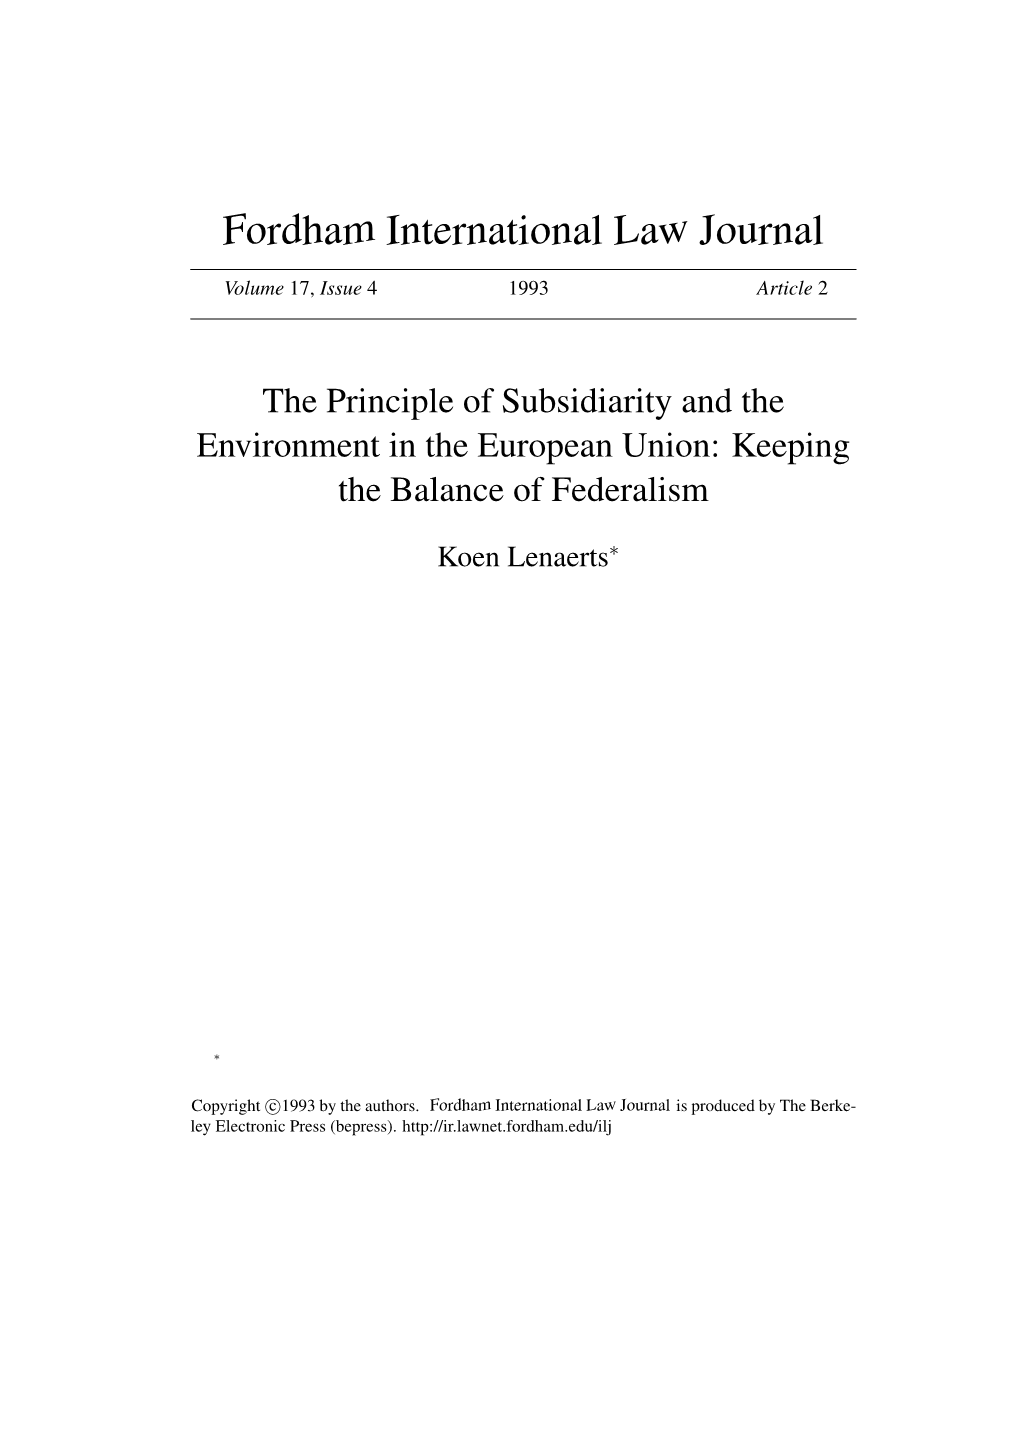 The Principle of Subsidiarity and the Environment in the European Union: Keeping the Balance of Federalism